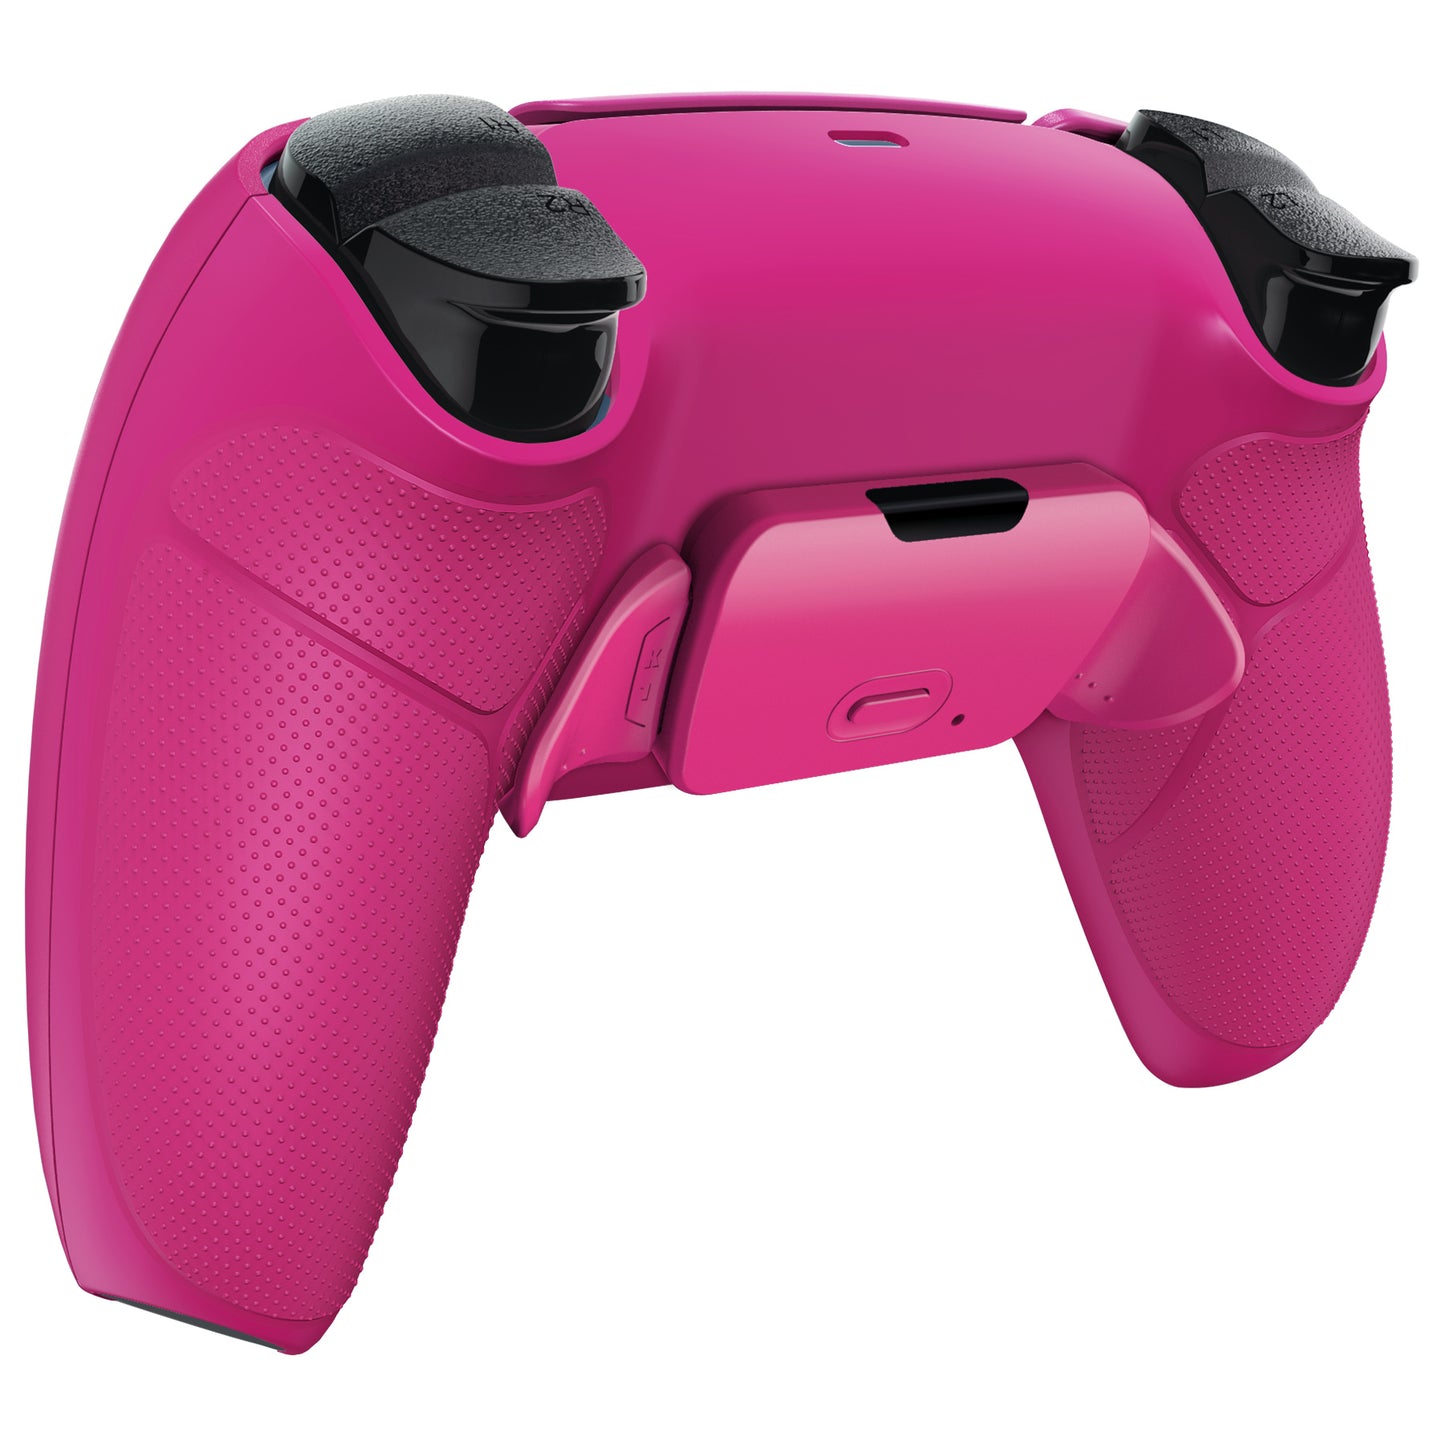 eXtremeRate Retail Nova Pink Rubberized Grip Back Paddles Remappable Rise Remap Kit with Upgrade Board & Redesigned Back Shell & Back Buttons Attachment for PS5 Controller BDM-010 & BDM-020 - XPFU6009